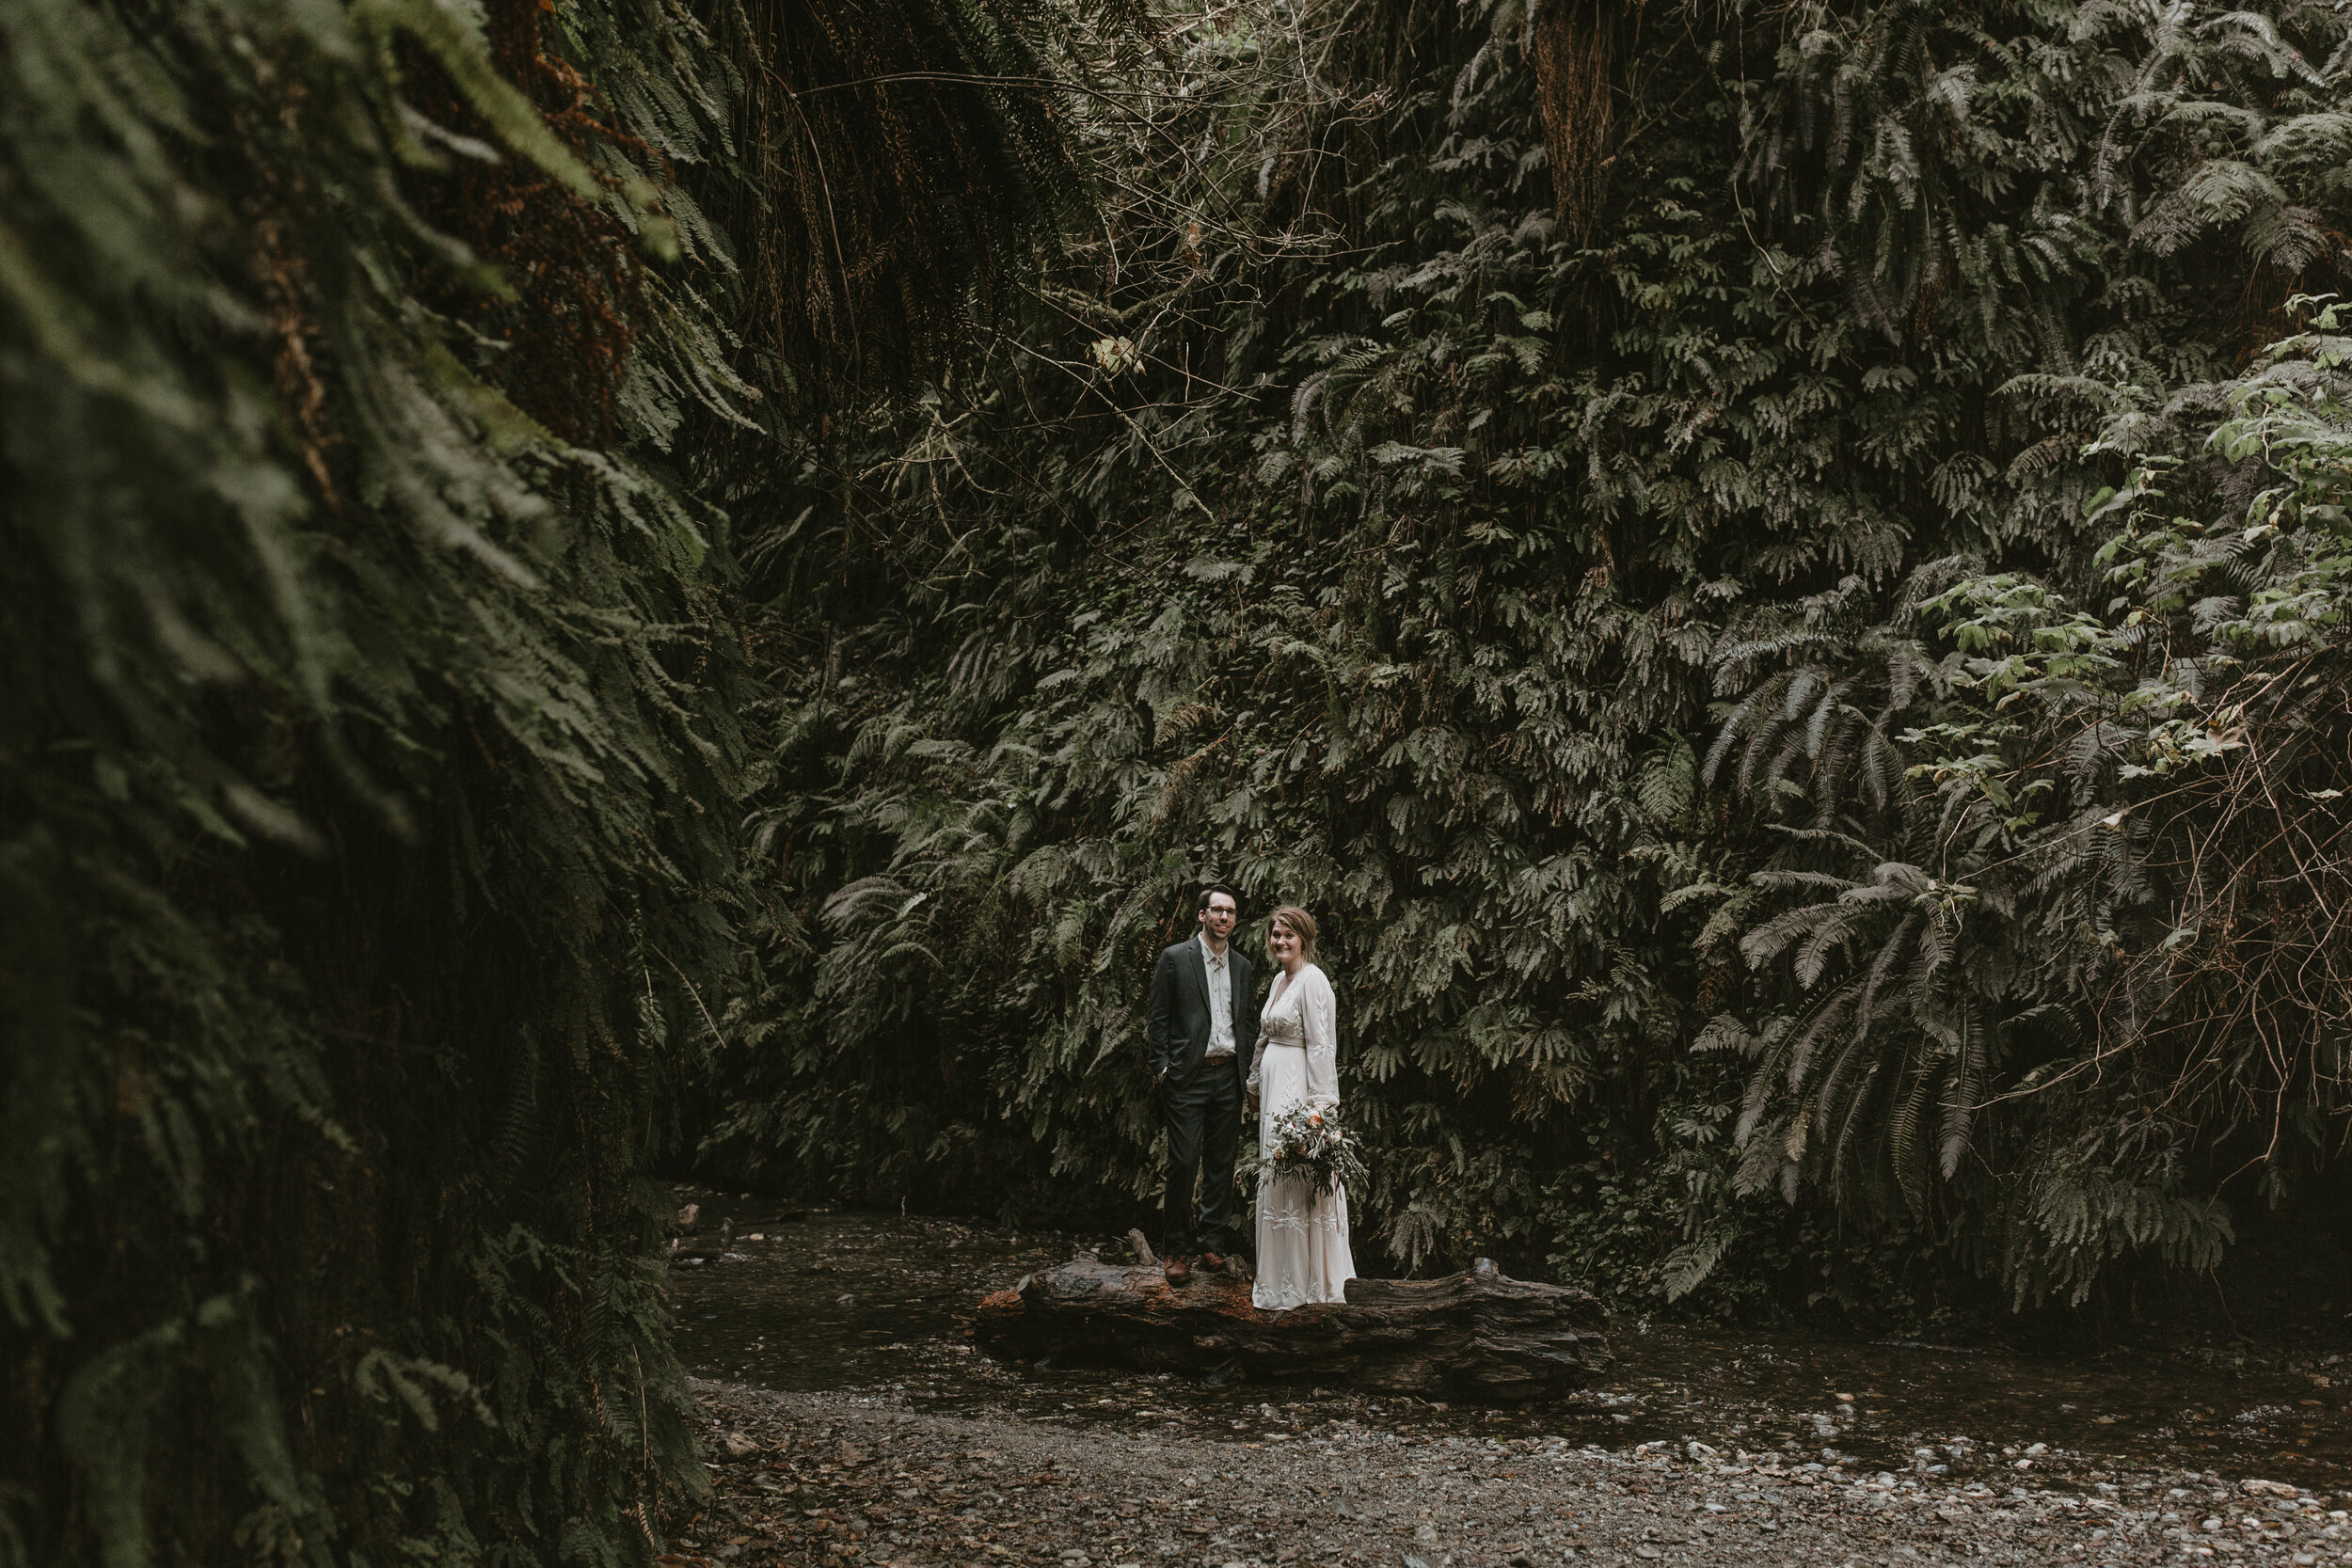 nicole-daacke-photography-redwood-forest-elopement-in-northern-california-patricks-point-coast-adventure-elopement-photography-redwoods-elopement-photographer-176.jpg